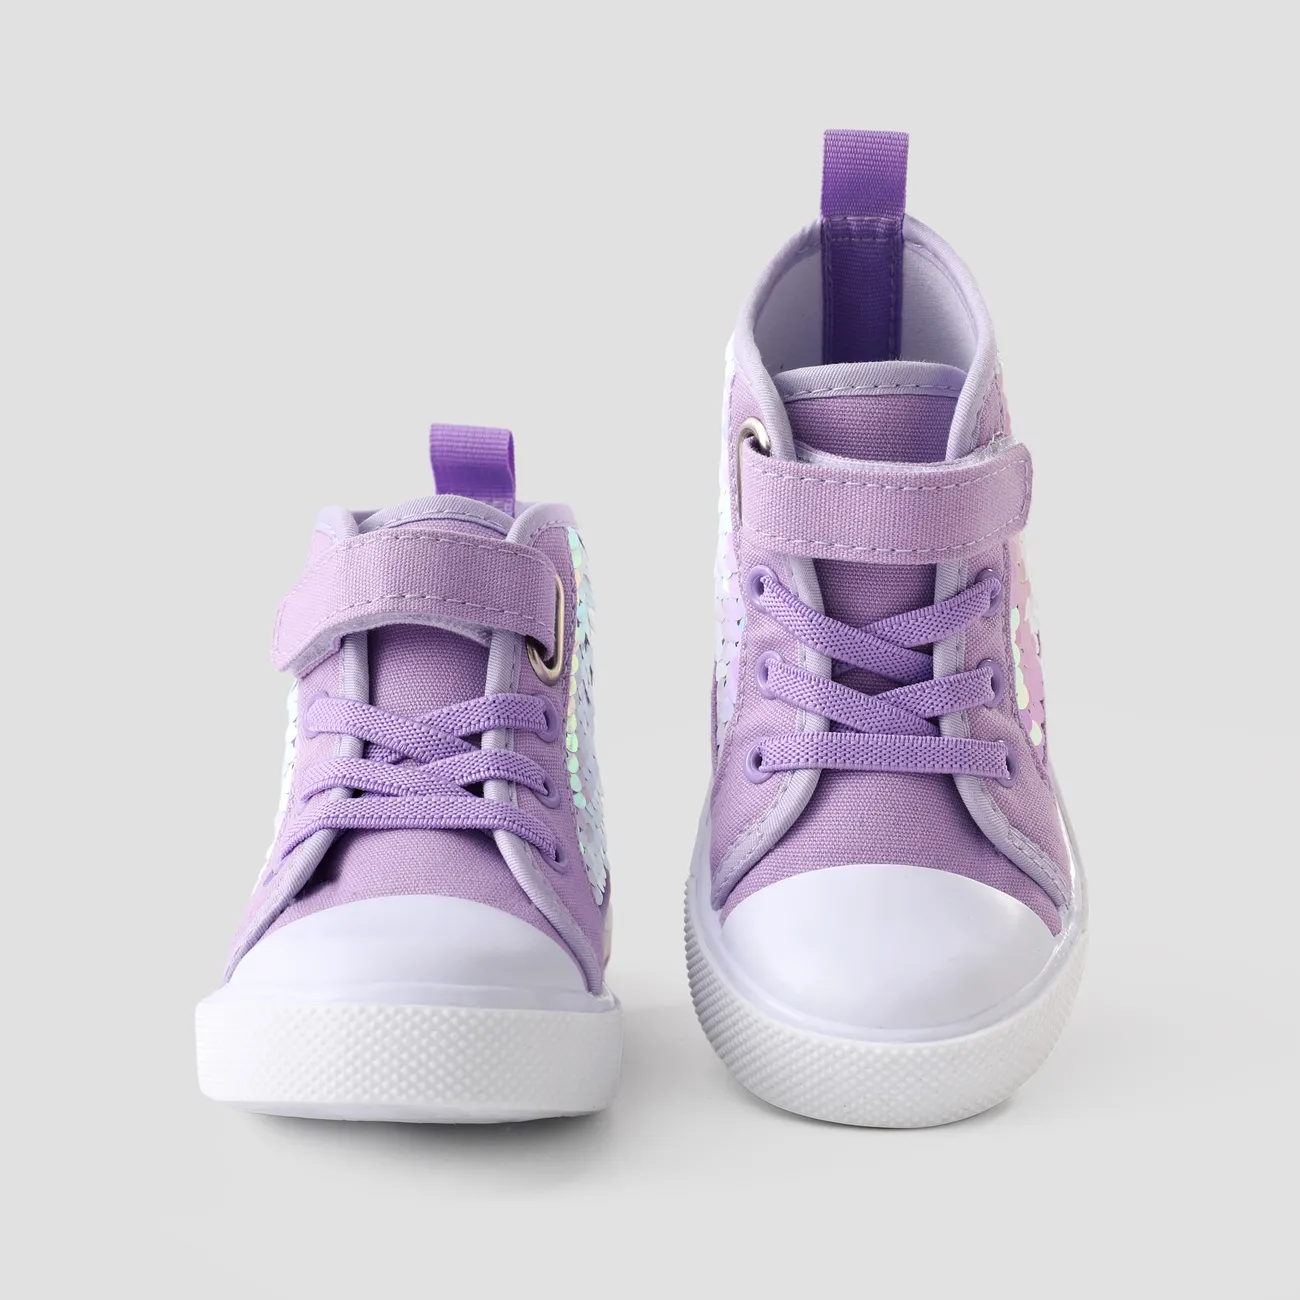 Toddler & Kids Girls Solid Color Glitter Design High Top Velcro Casual Shoes Purple big image 1